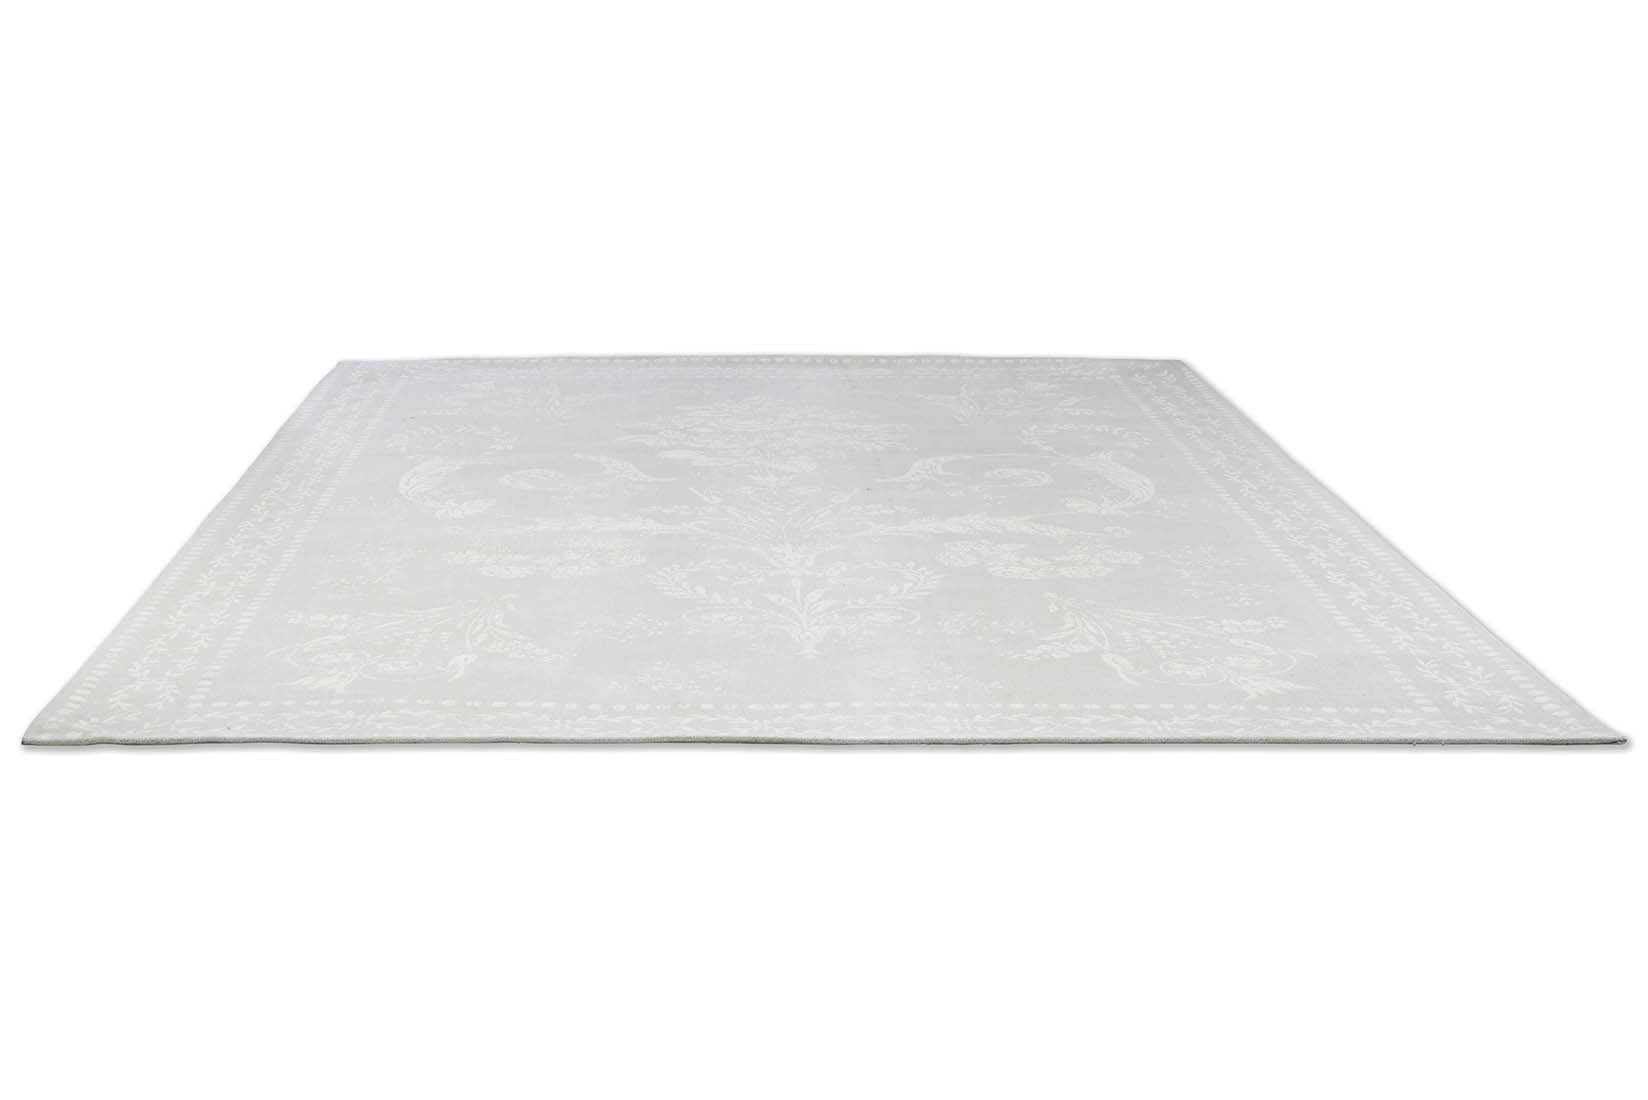 Grey cotton rug in a damask pattern
